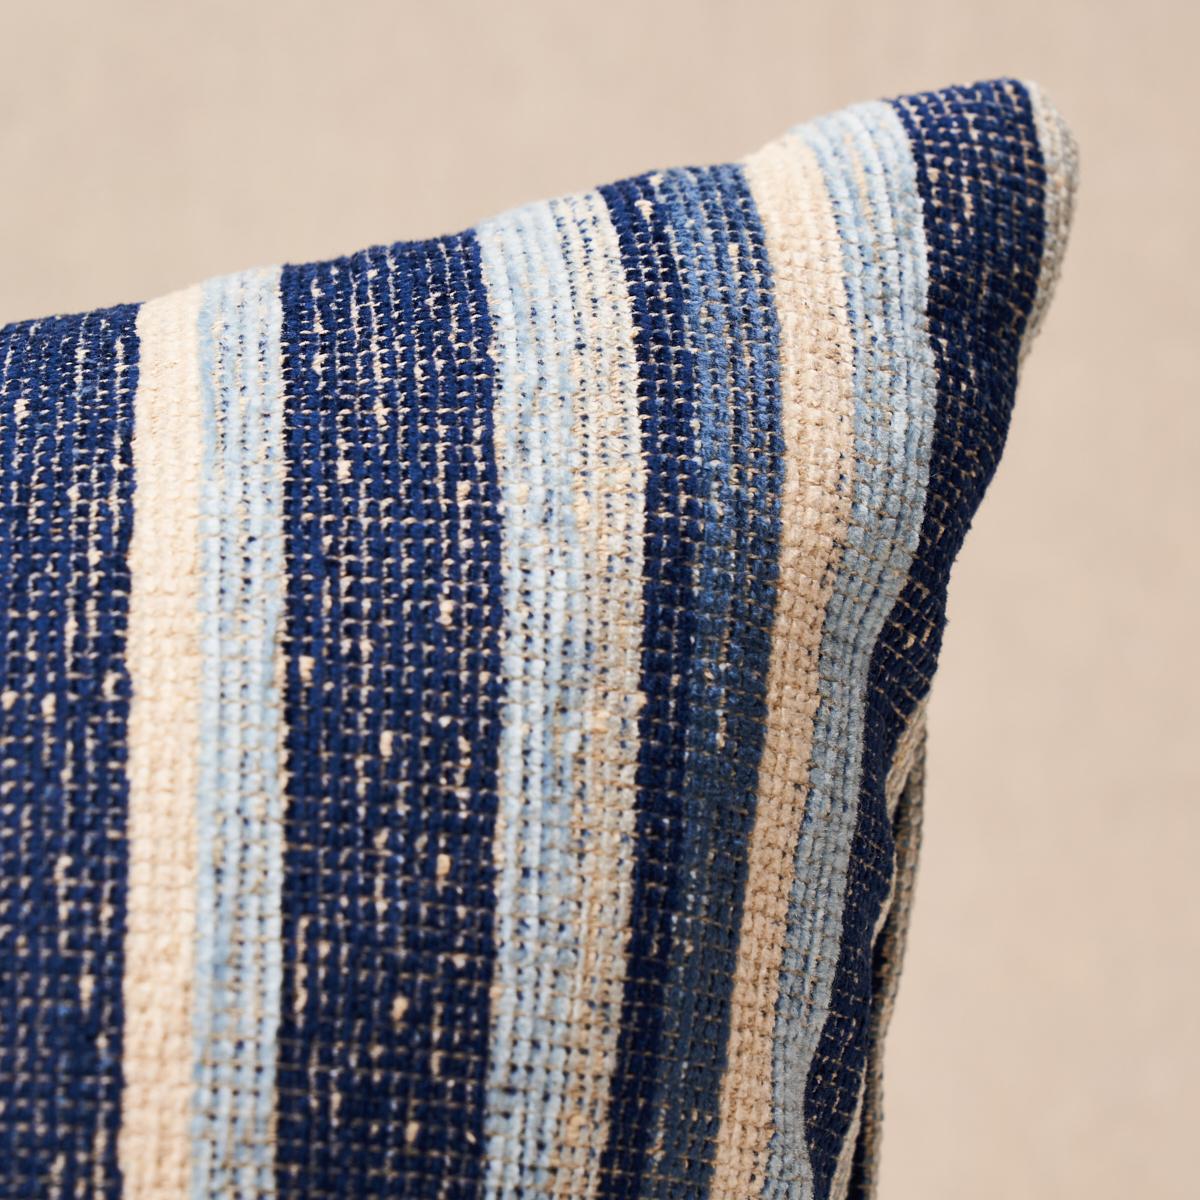 This pillow features Tierra Stripe with a knife edge finish. Inspired by a vintage handwoven blanket, this textural, tonal offset stripe in blue gets its velvety hand from a blend of chunky cotton and linen chenille yarns. Soft yet substantial,